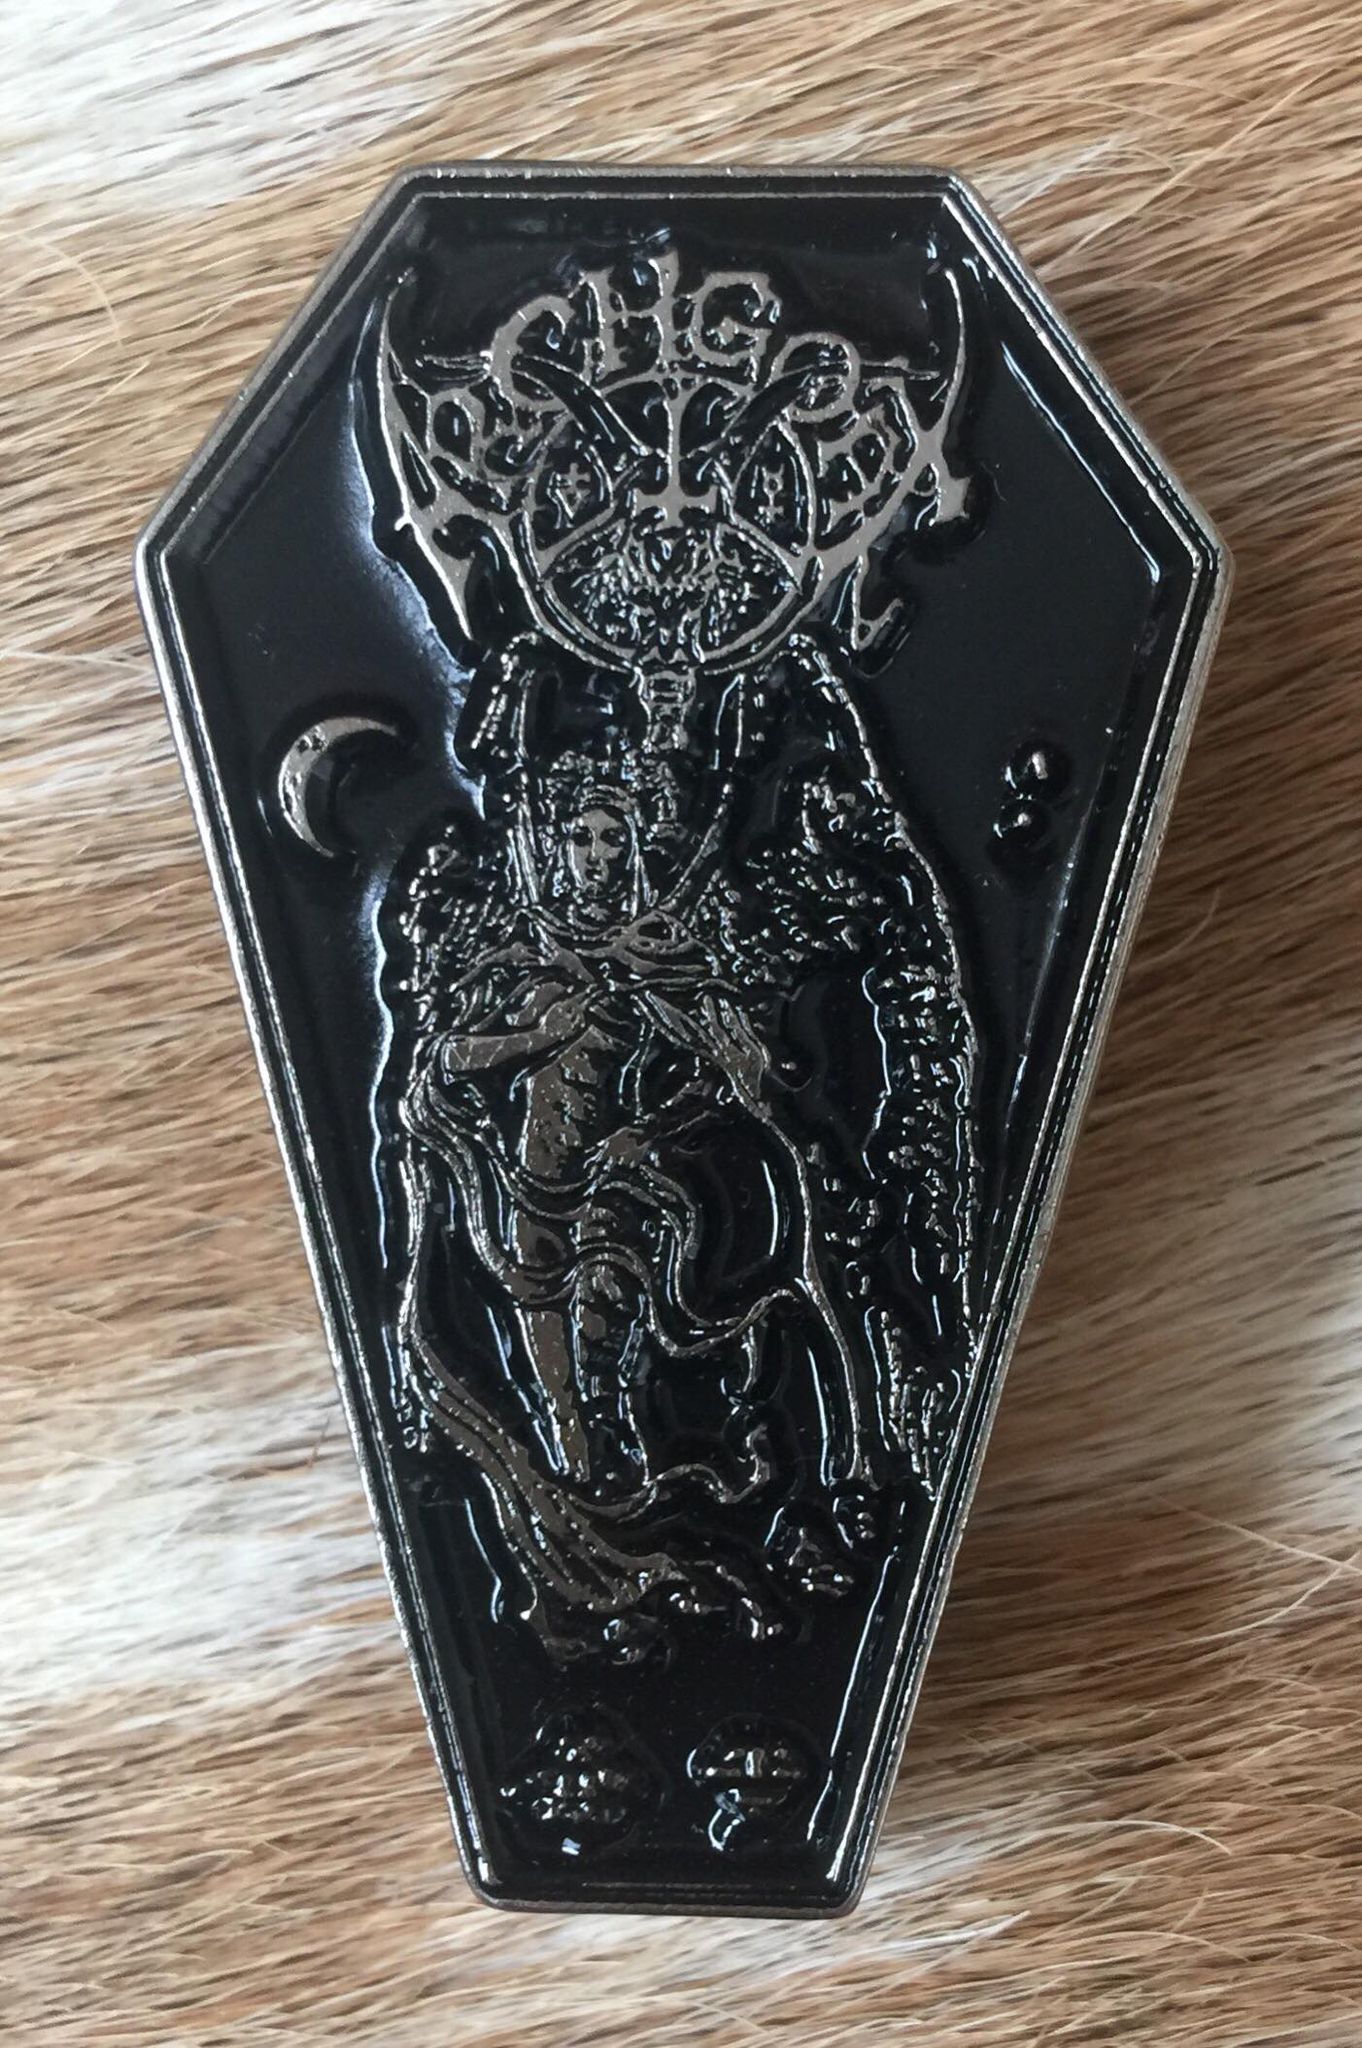 Archgoat - Whore of Bethlehem Coffin Shaped Metal Pin